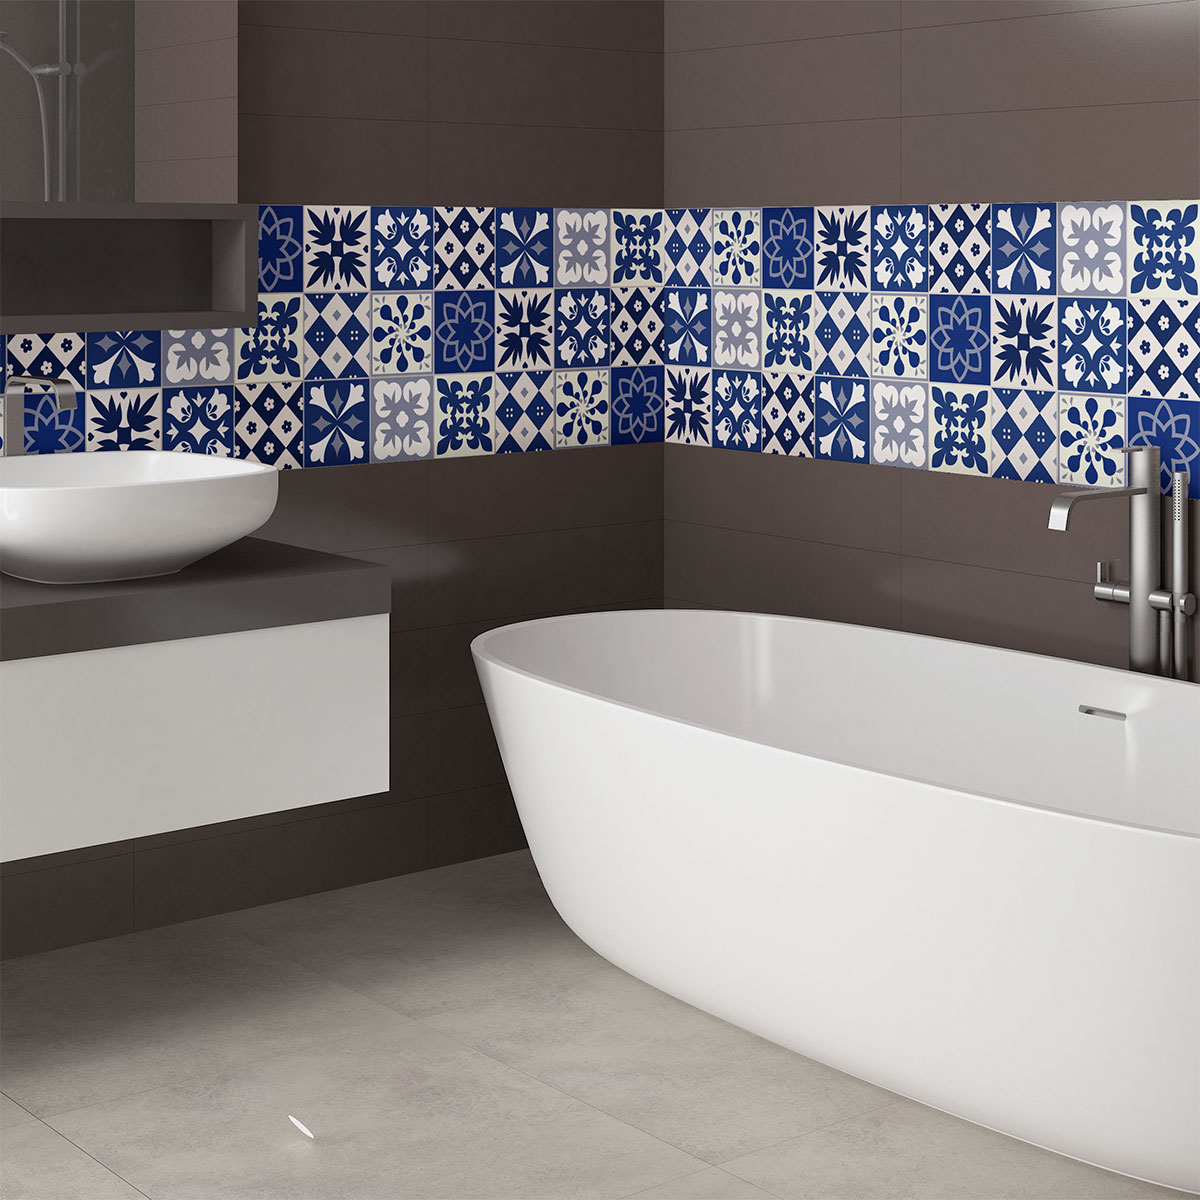 9 wall stickers cement tiles azulejos linia